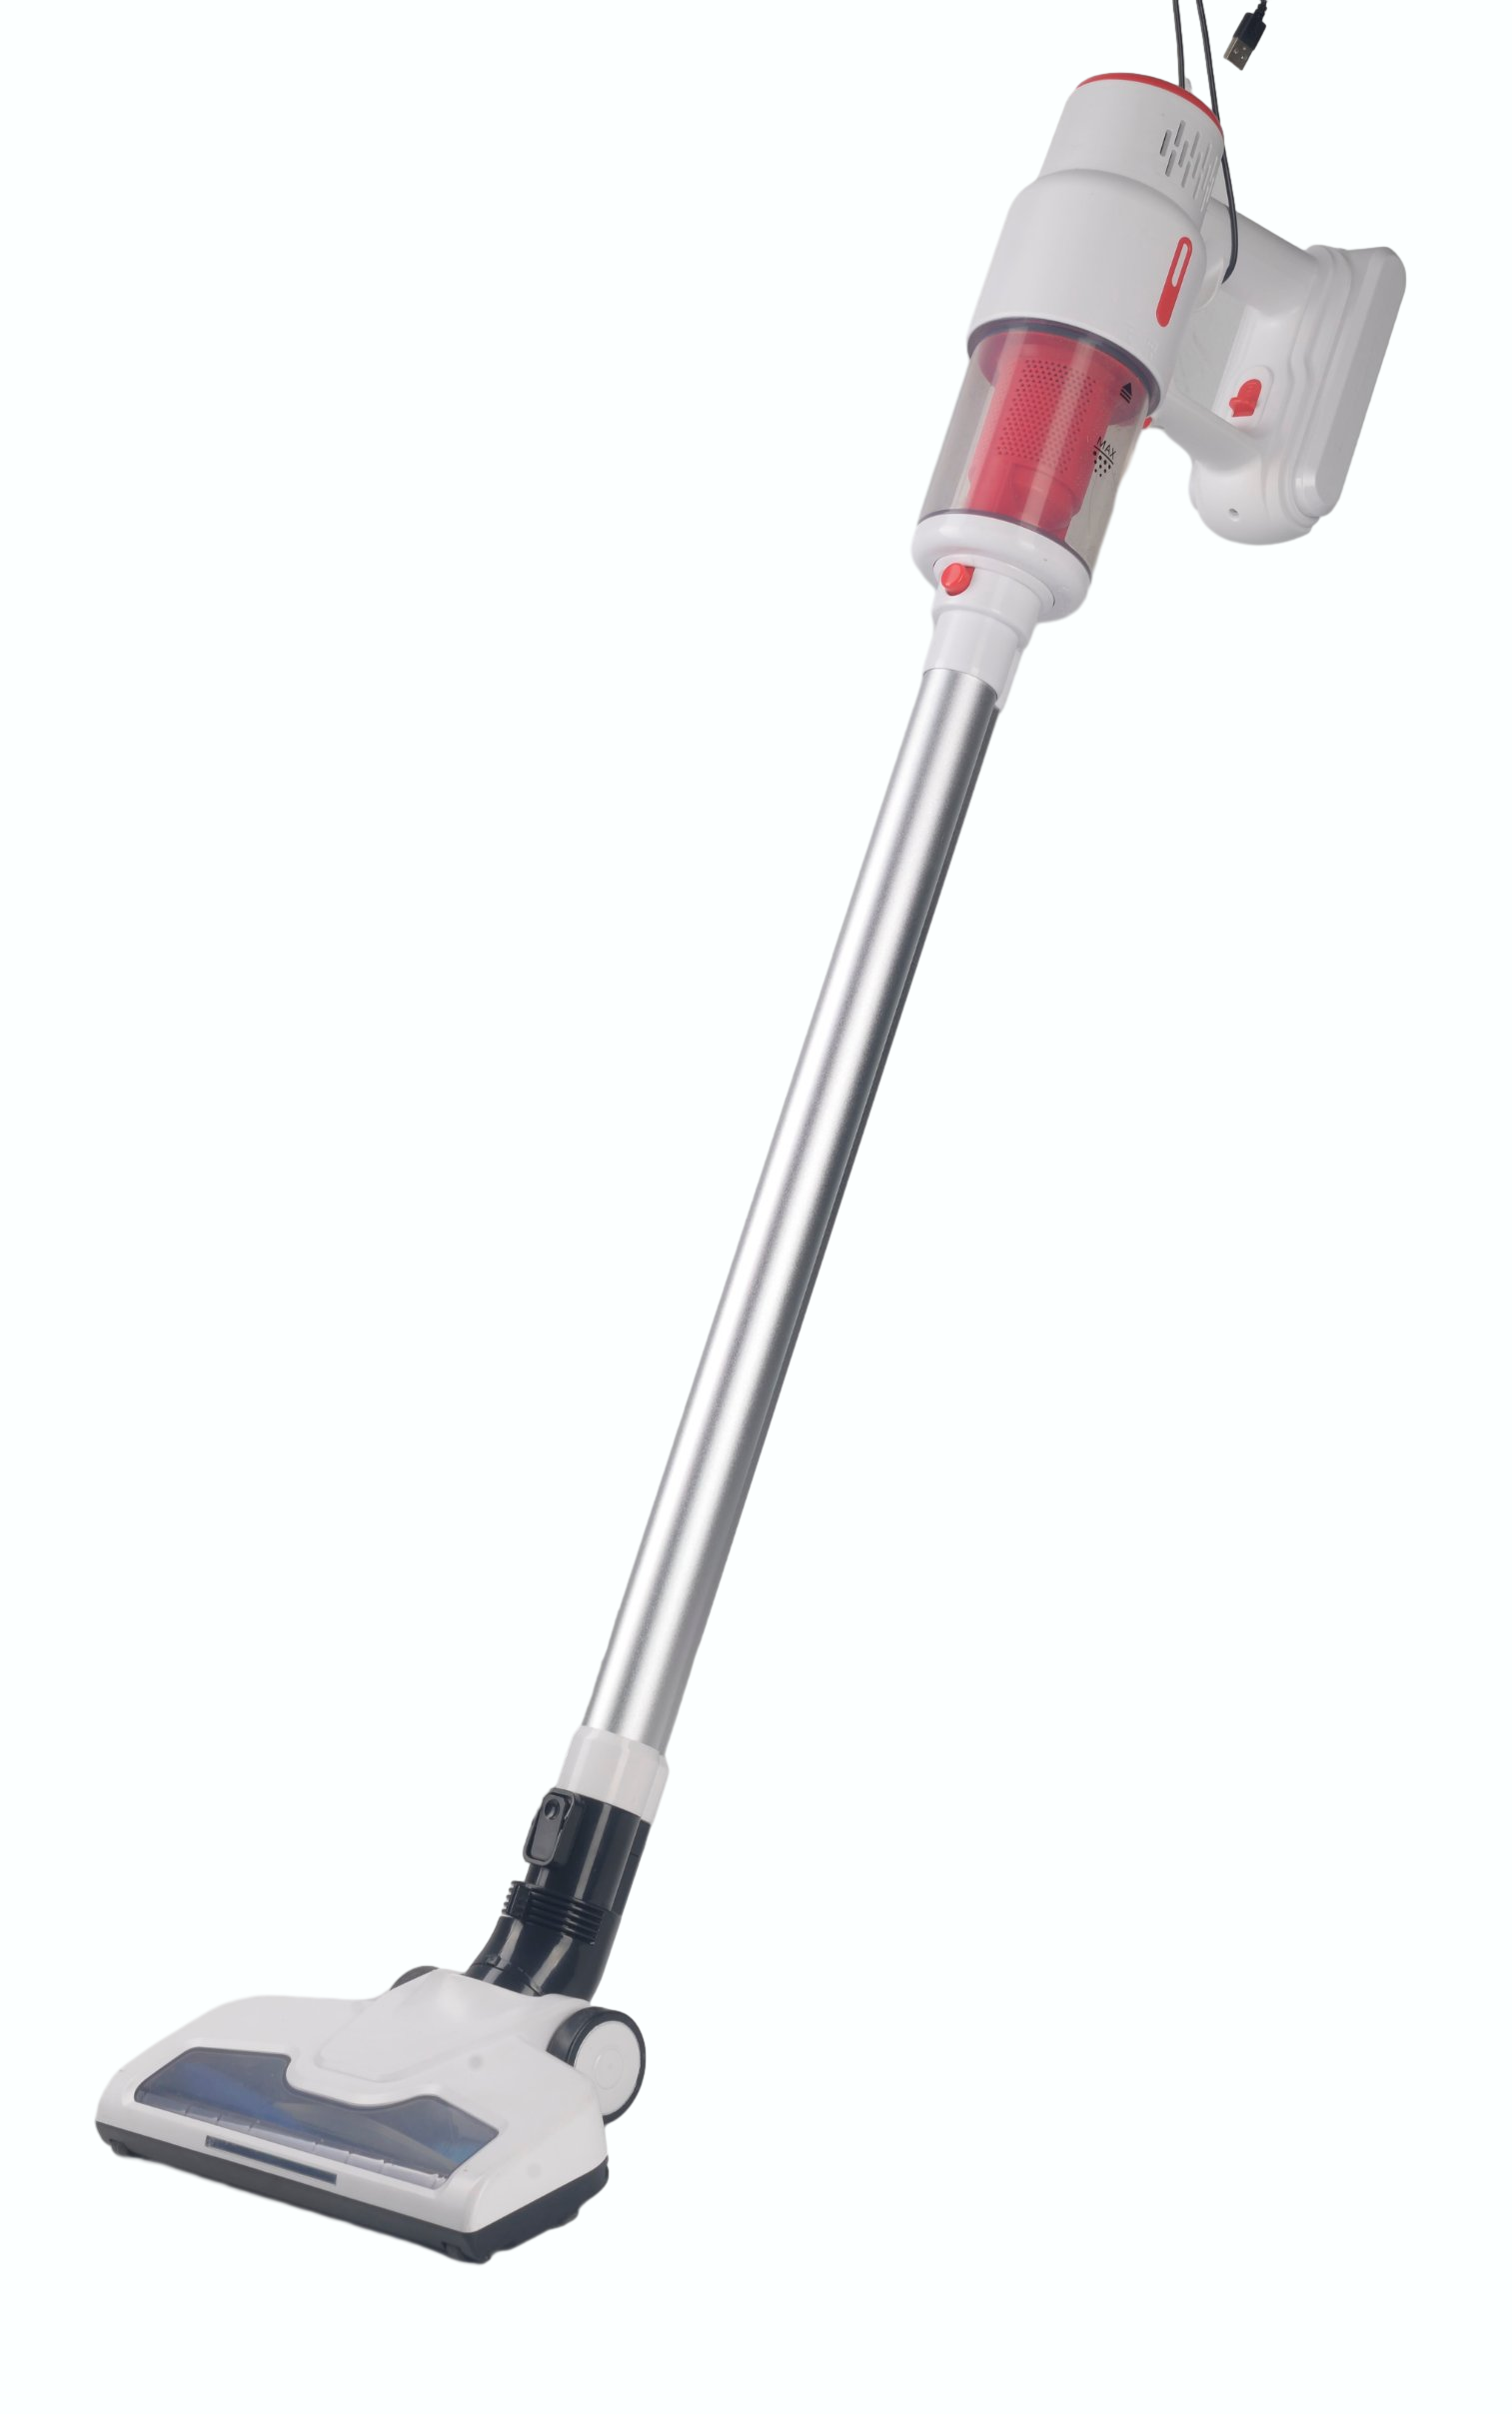 4in1 Vacuum and Handle and Stick Home Use Cordless Vacuum Cleaner